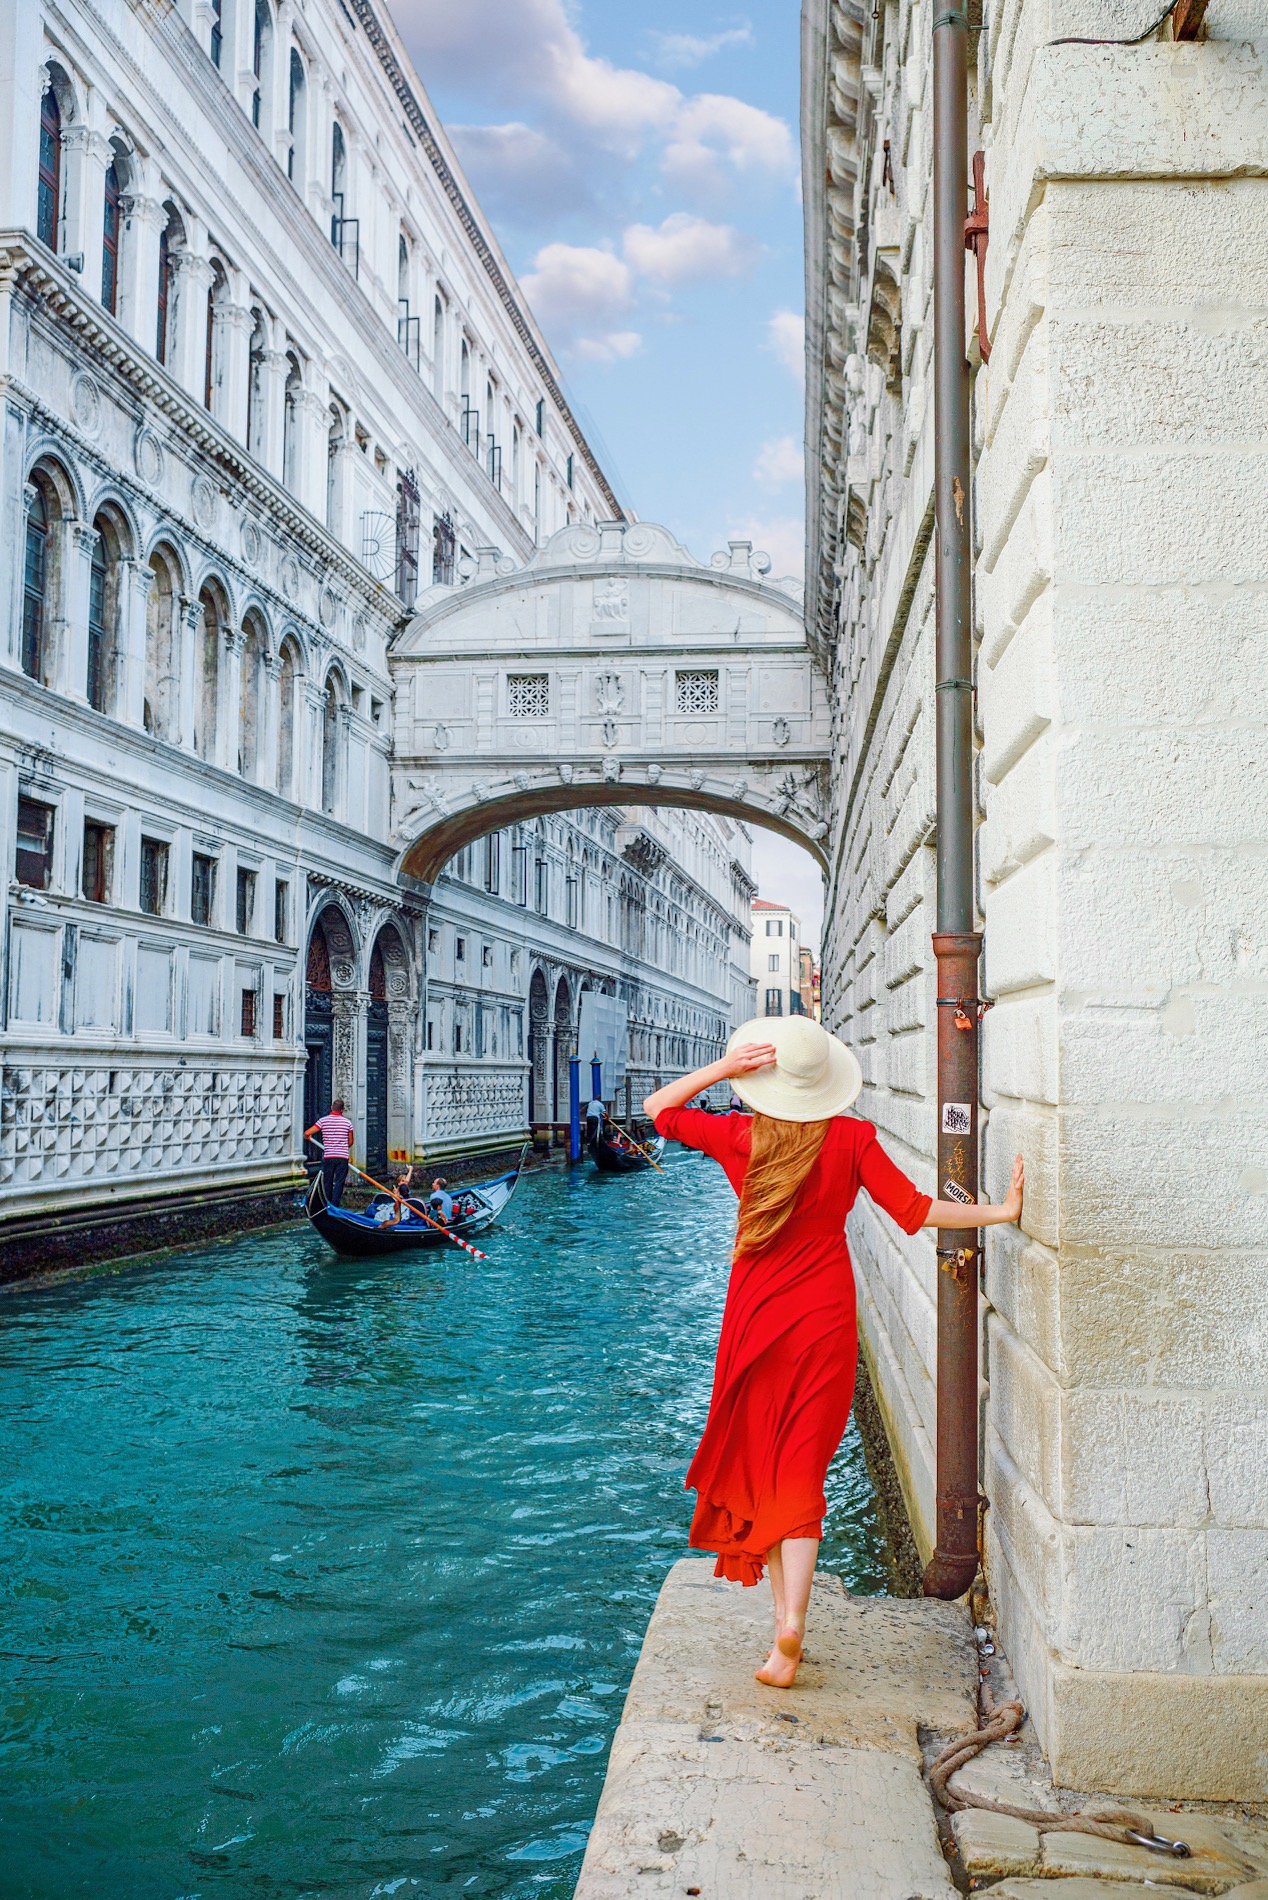 Woman in red dress stands next to the canal under the Bridge of Sighs.